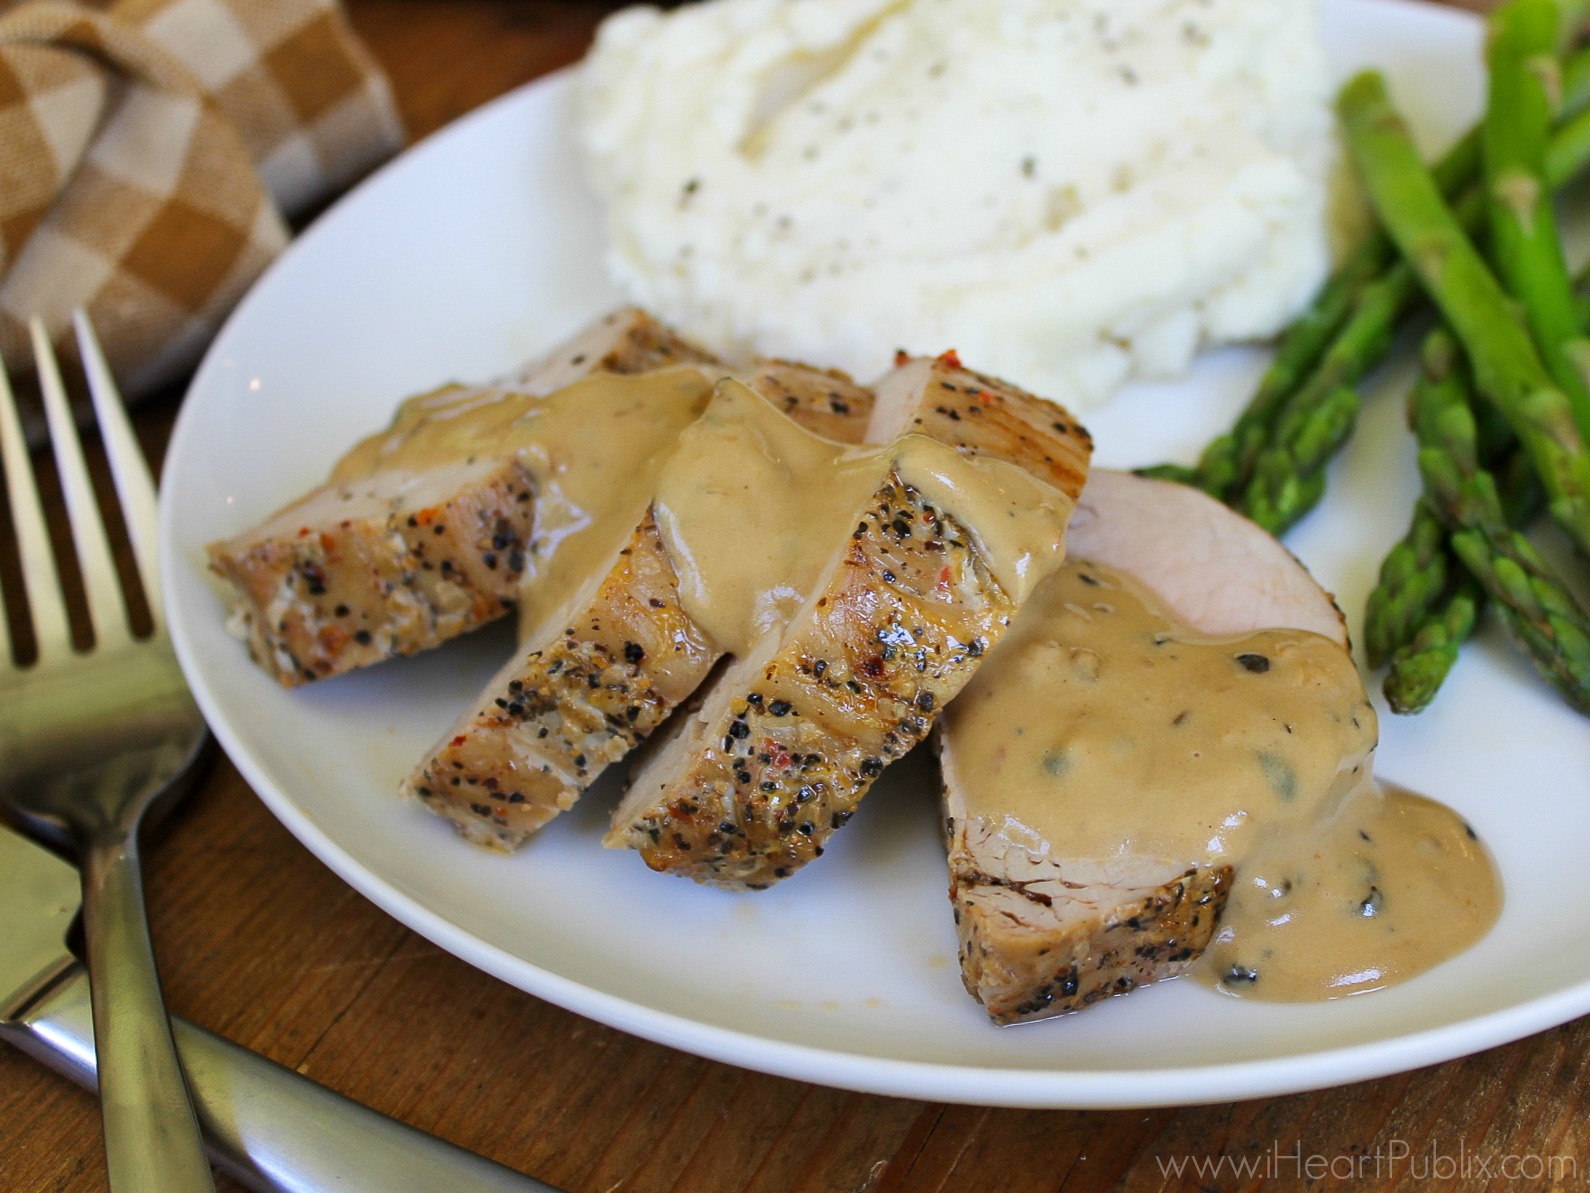 Pork Tenderloin With Peppercorn Sauce – Perfect Meal For The Super Deal On Smithfield Marinated Fresh Pork At Publix